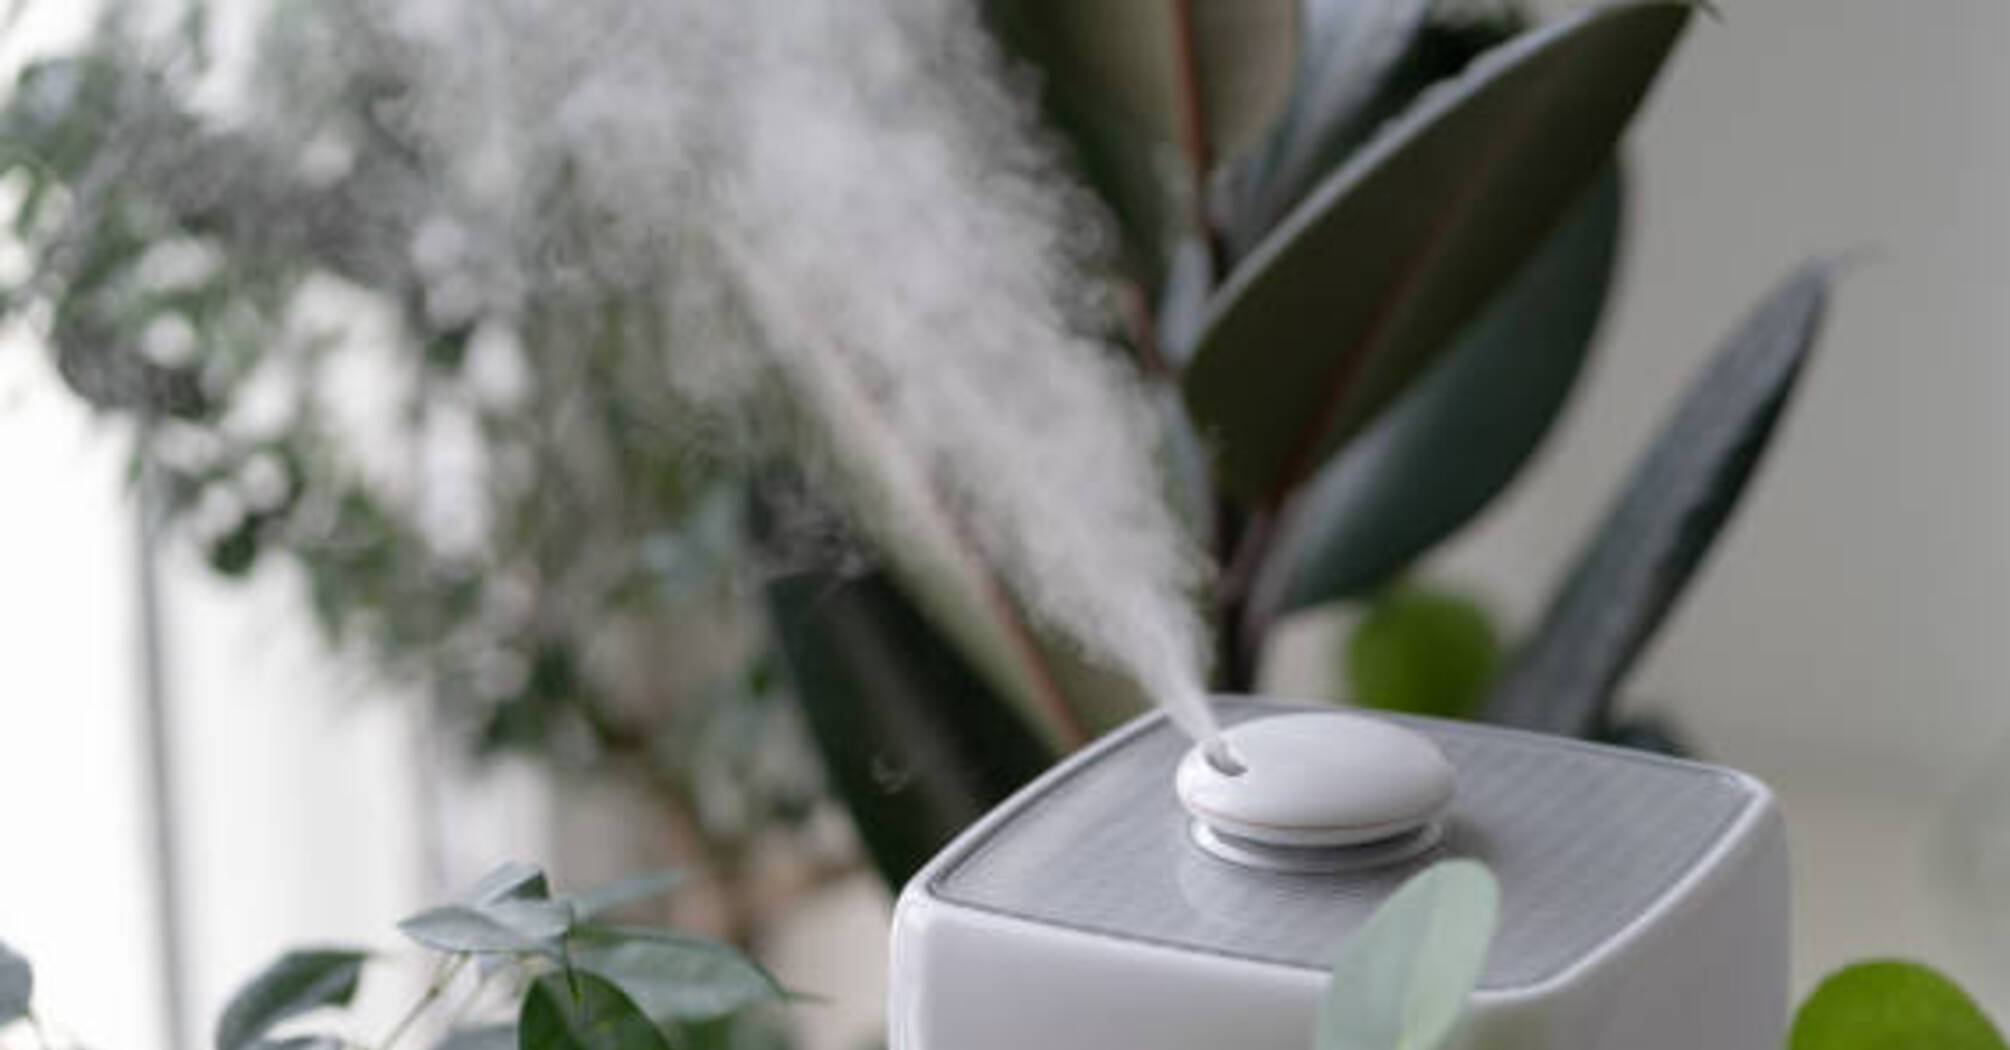 How to humidify the air in your home: 5 useful tips